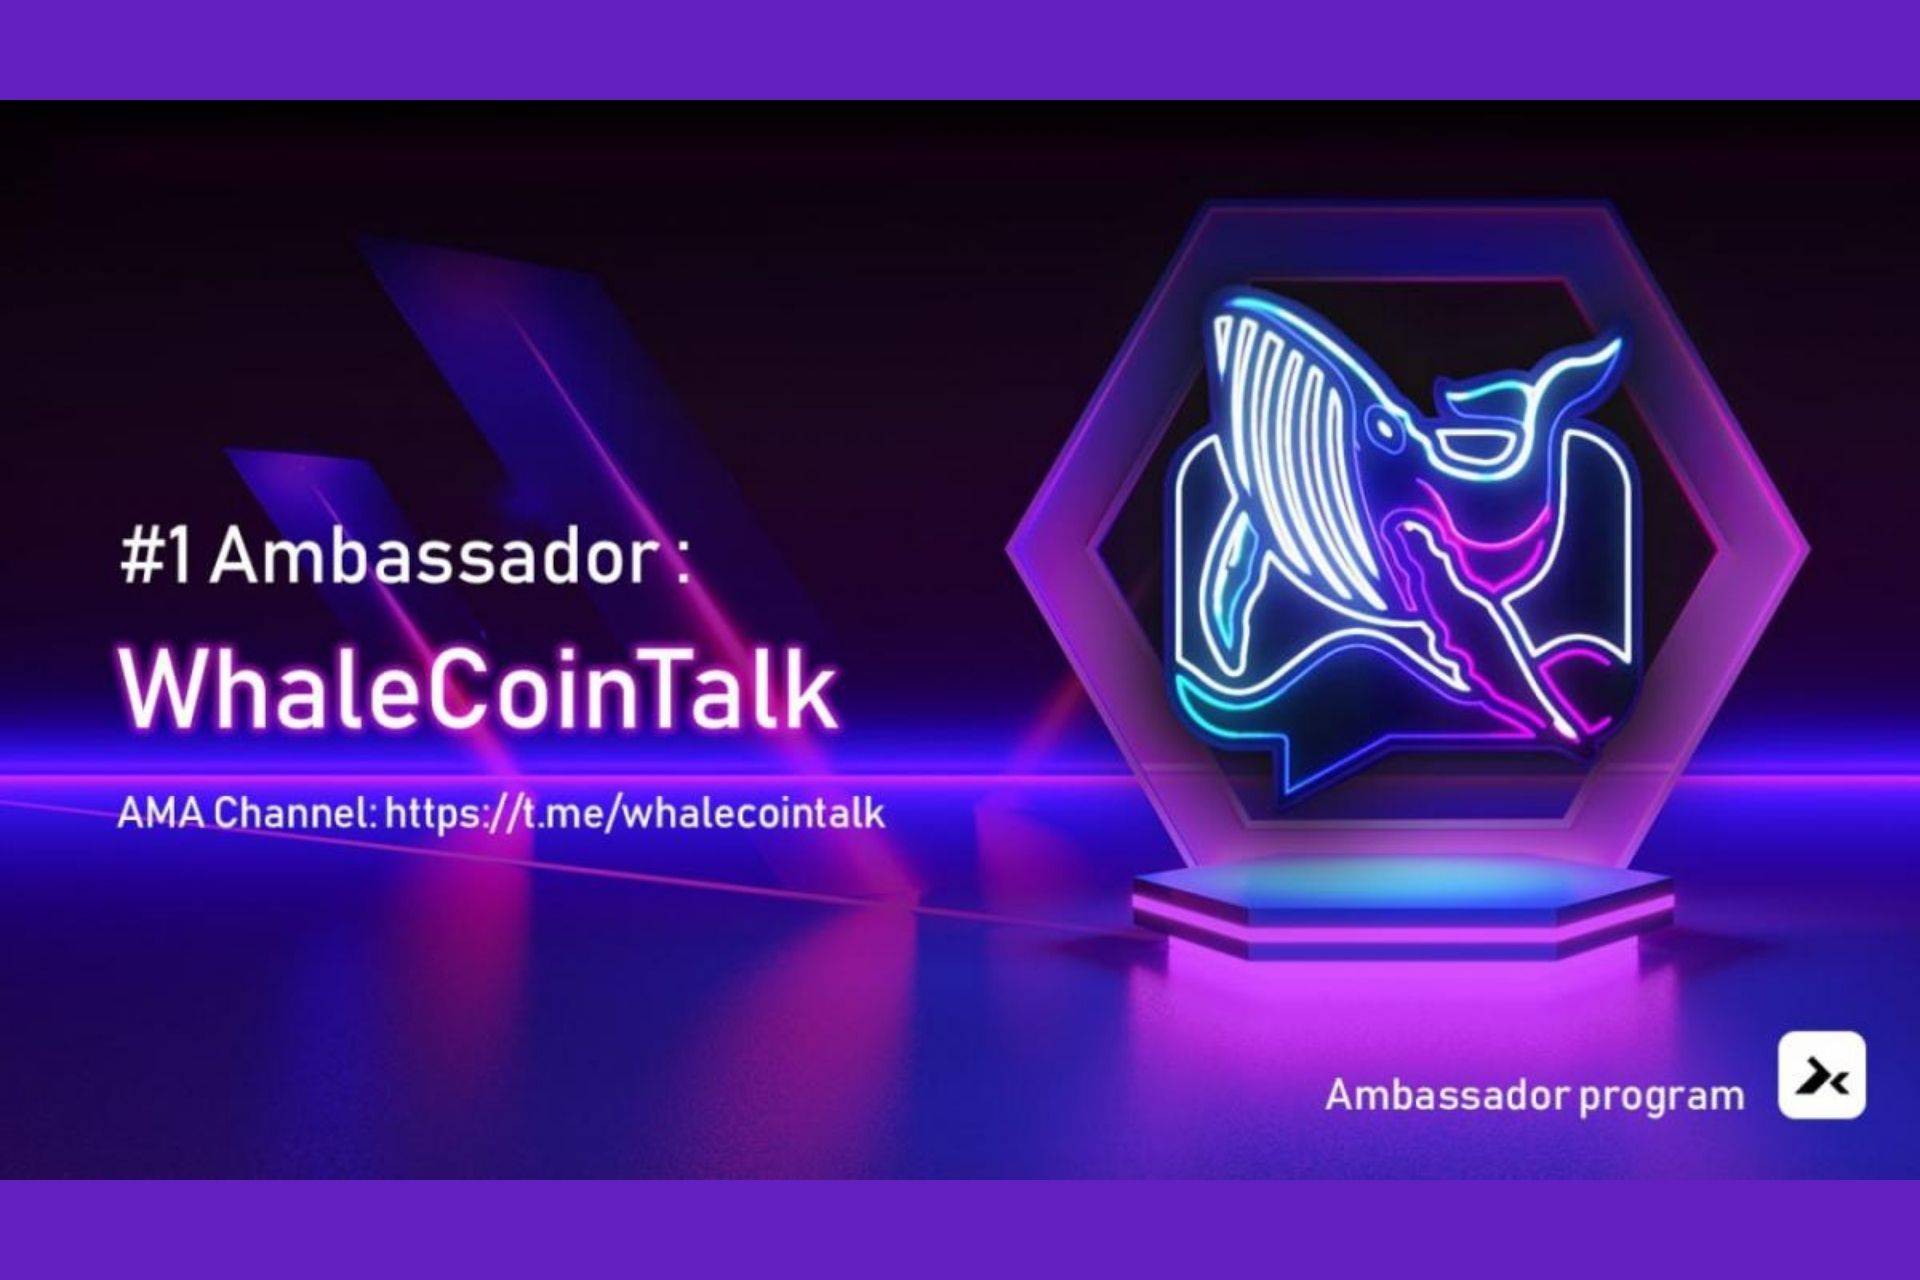 DxSale Selects Whale Coin Talk for Coveted Ambassador Program and Partnership